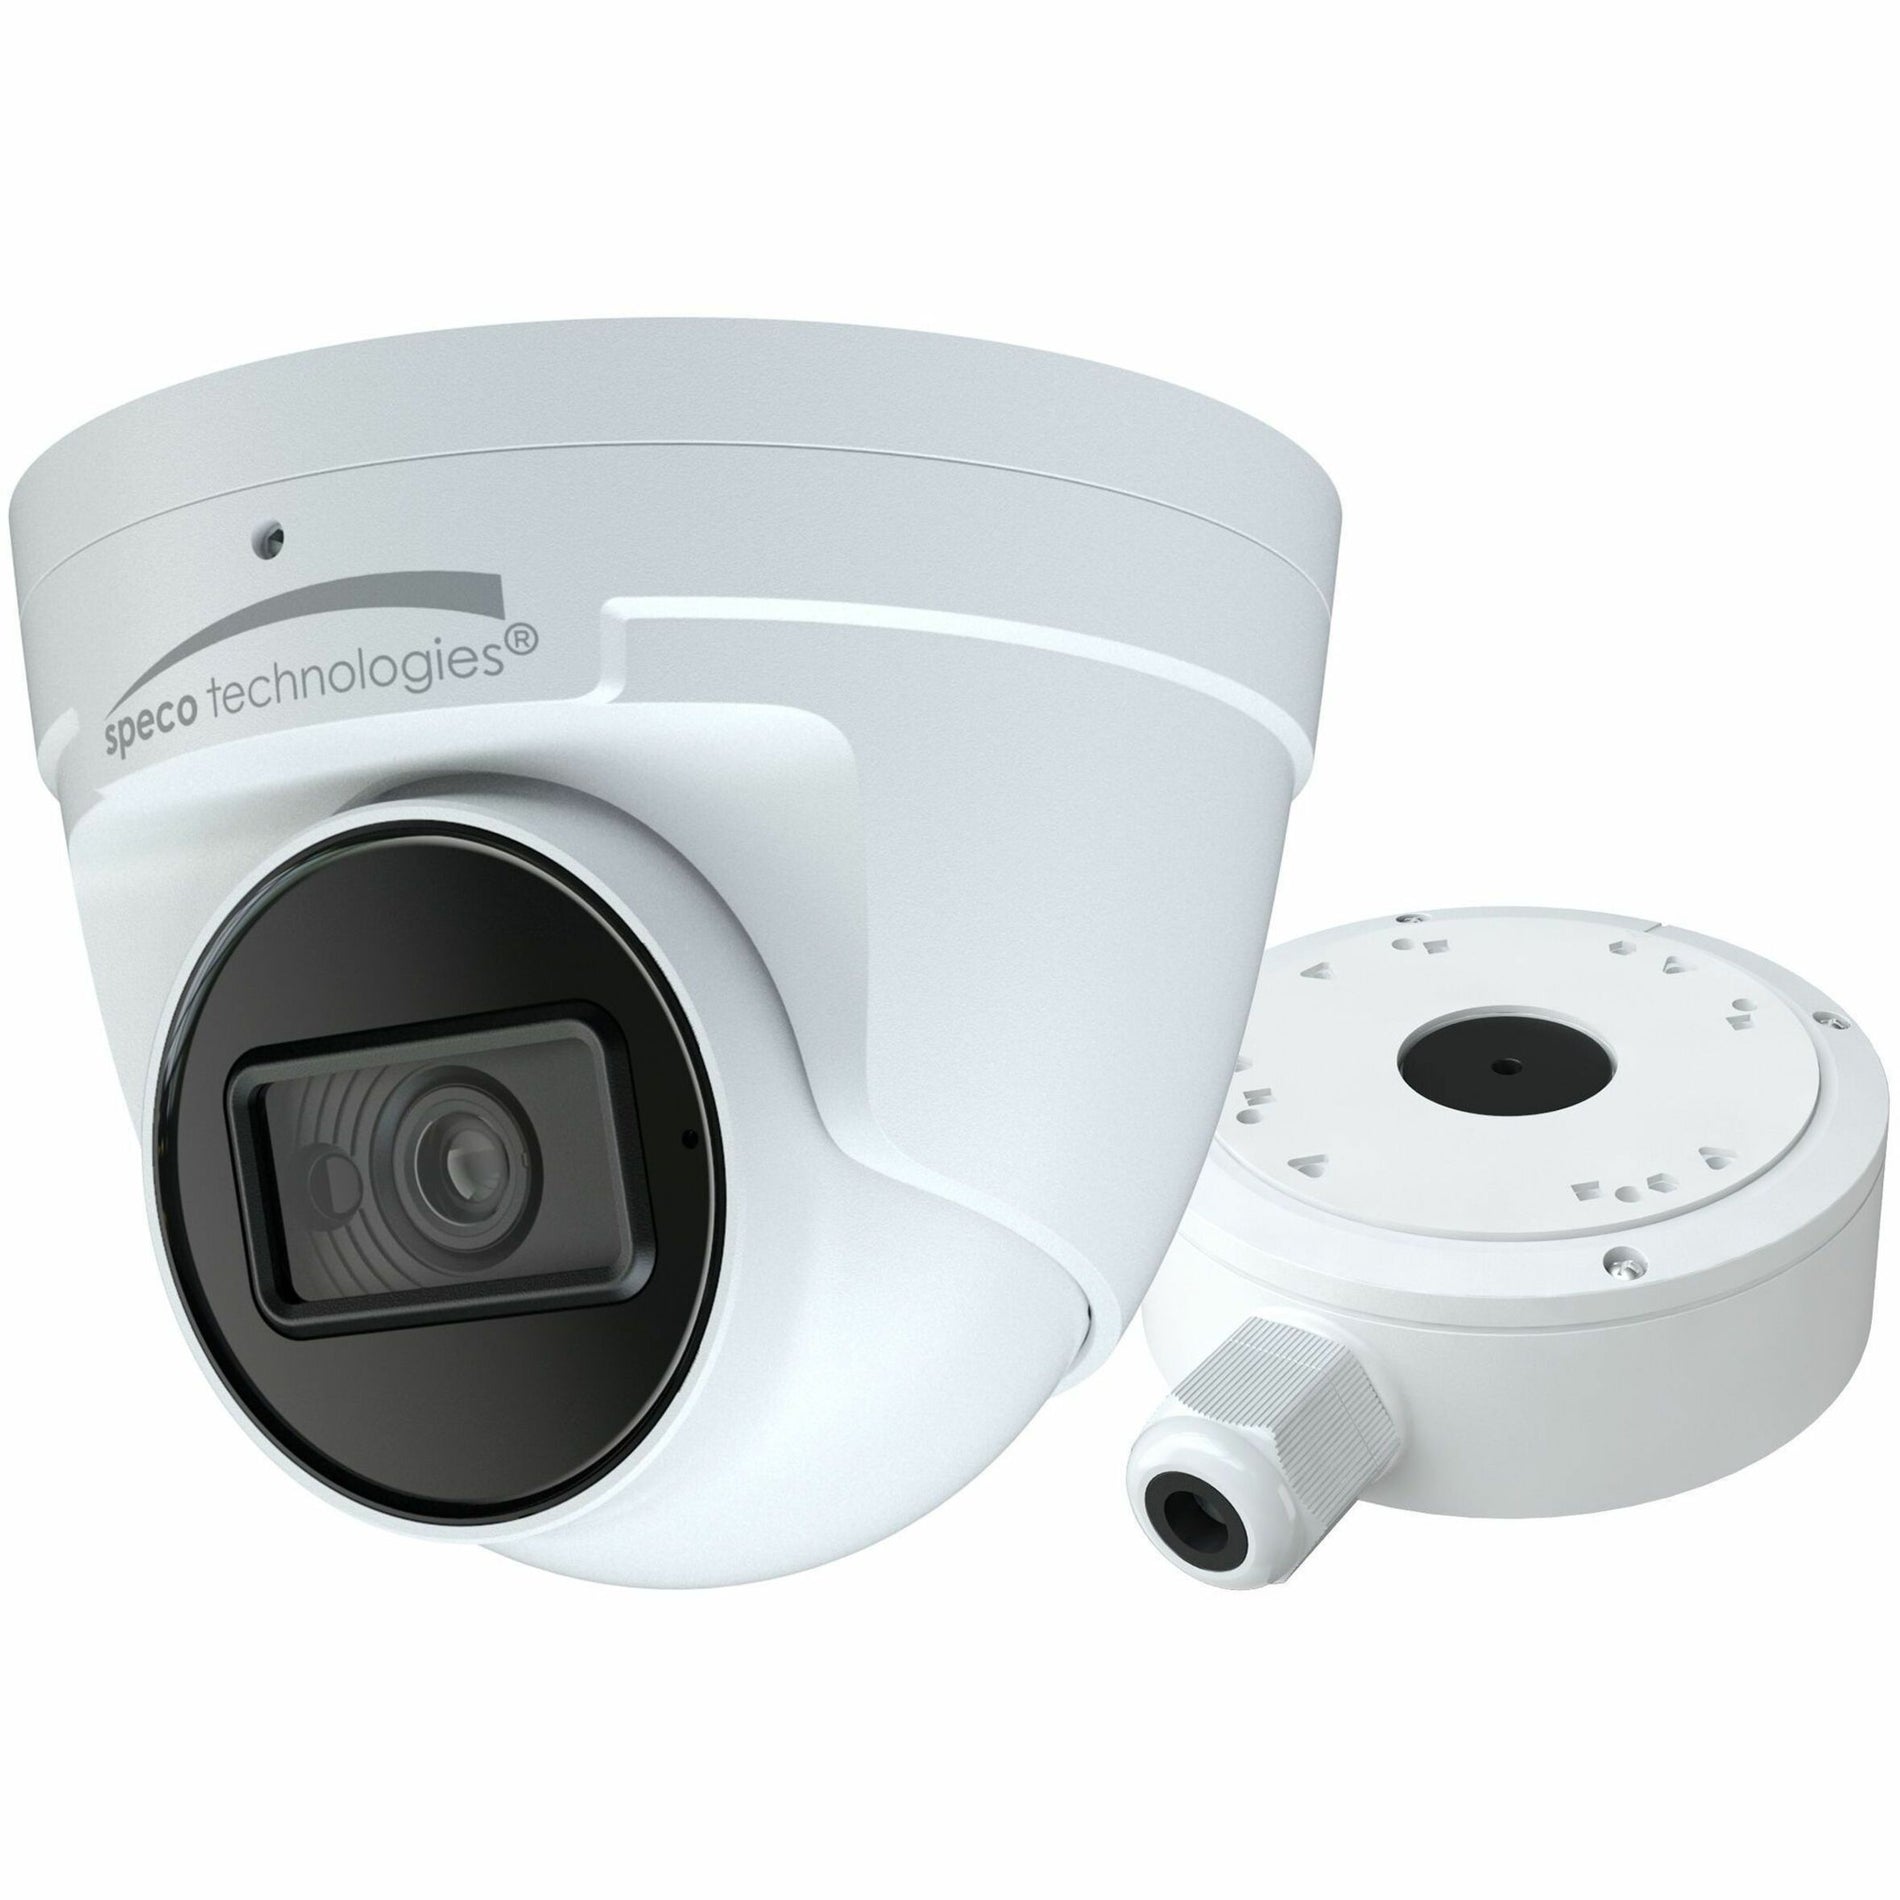 Speco O8T9 8MP (4K) H.265 IP Turret Camera with Advanced Analytics, Color, Weather Resistant, 98 ft Night Vision